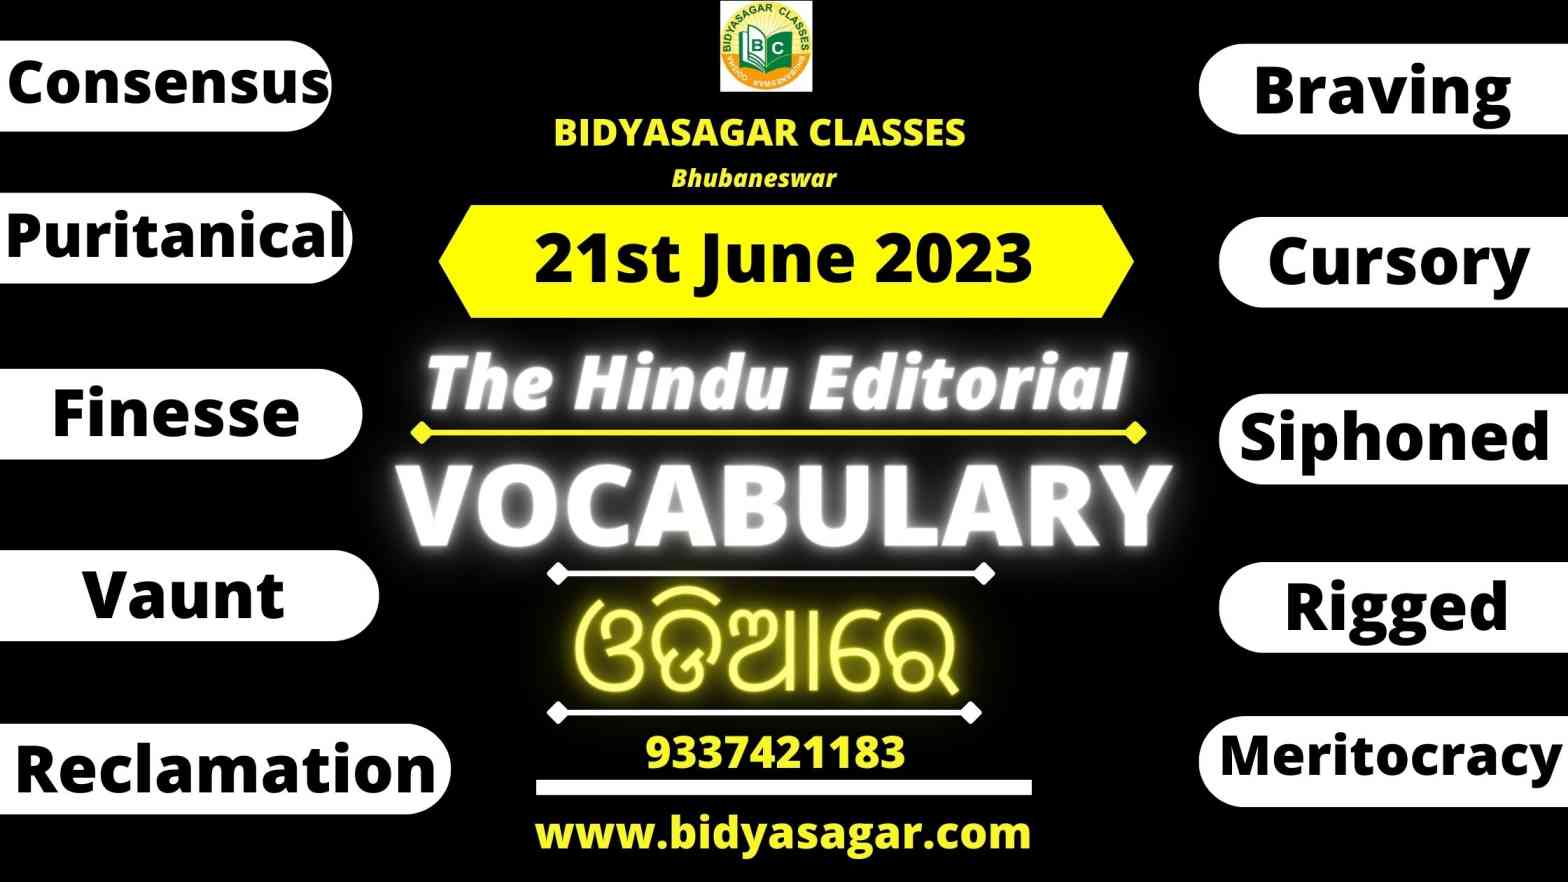 The Hindu Editorial Vocabulary of 21st June 2023